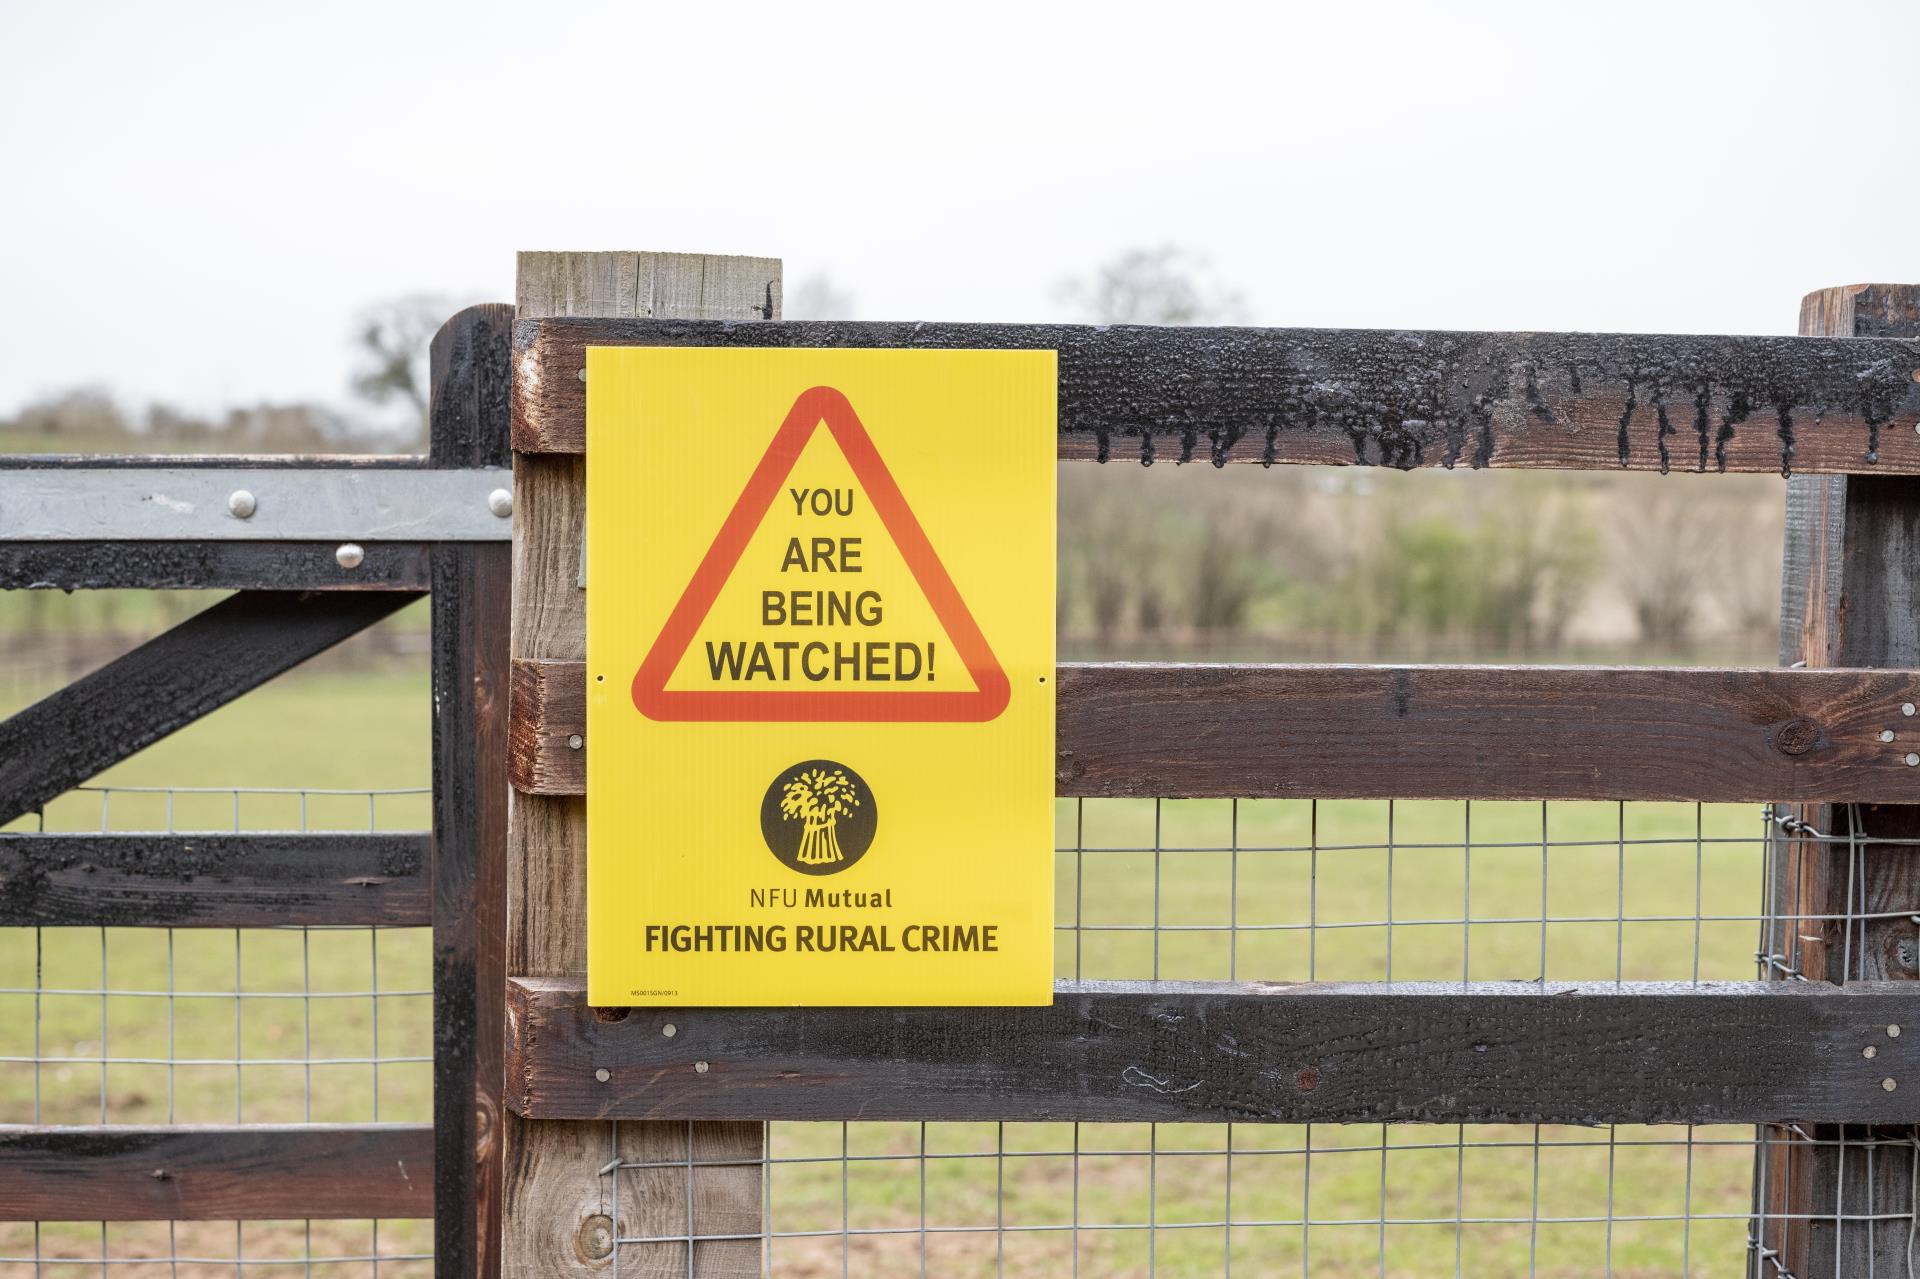 NFU Mutual is urging farmers to make their yards fortresses to deter thieves.